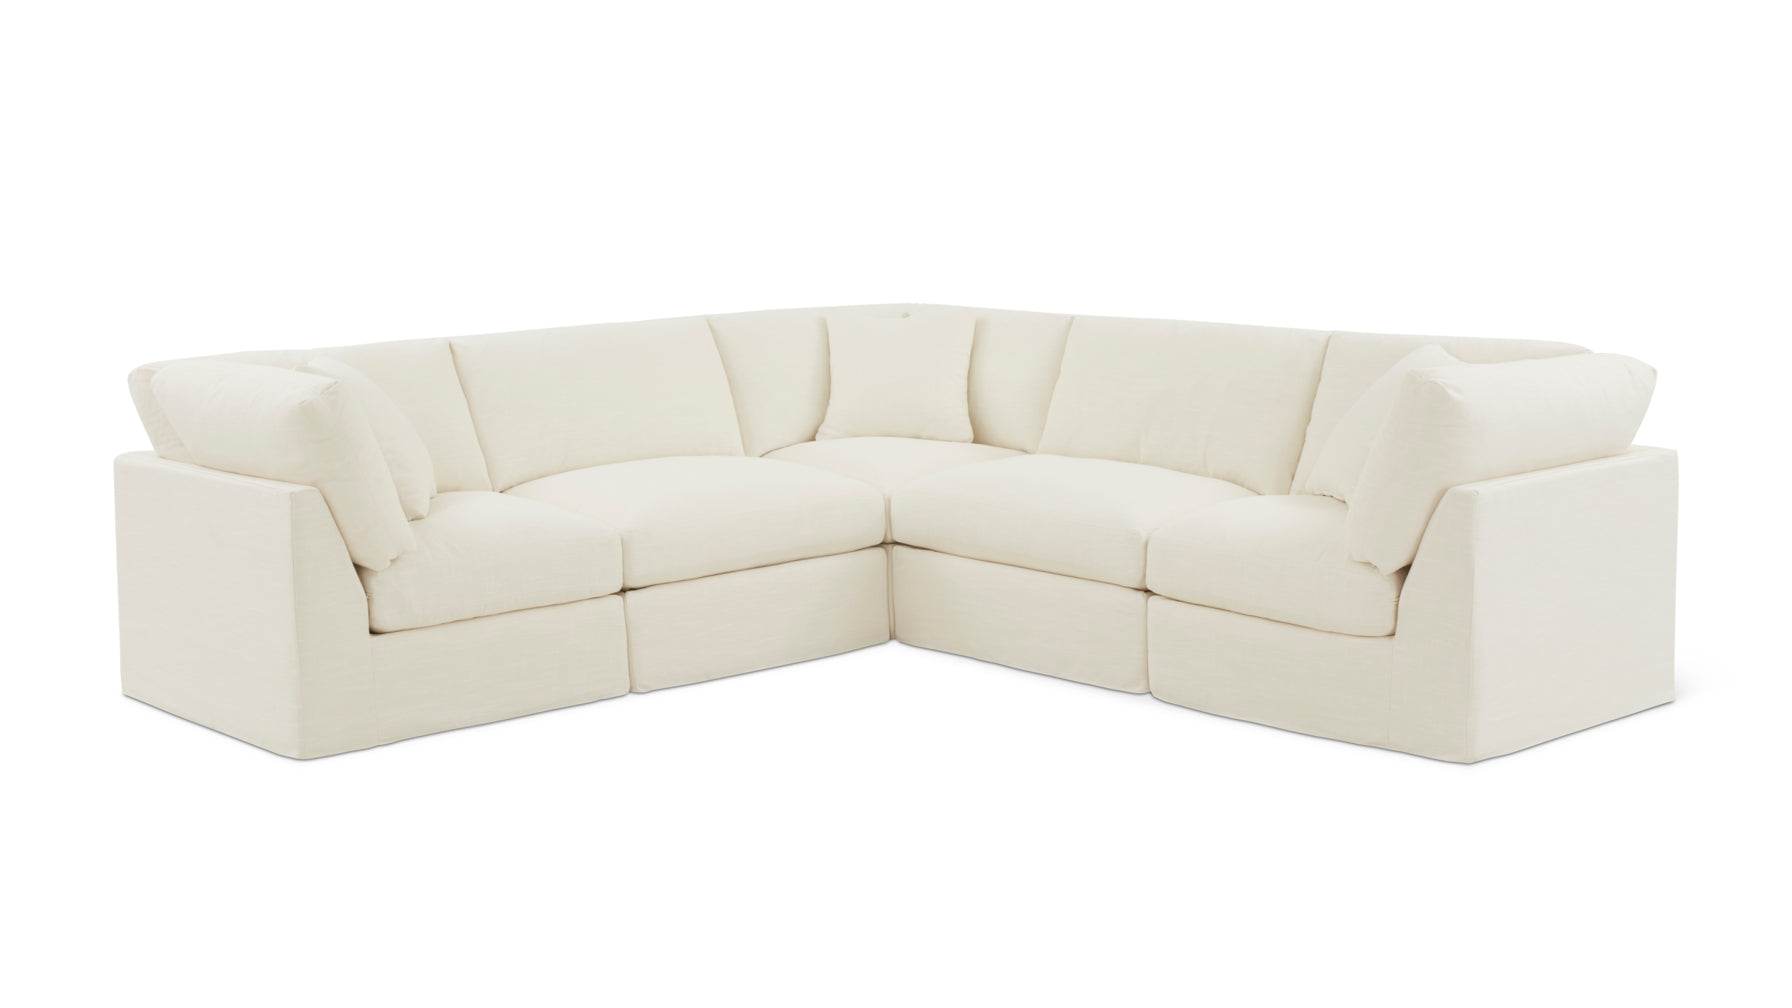 Get Together™ 5-Piece Modular Sectional Closed, Standard, Cream Linen - Image 3